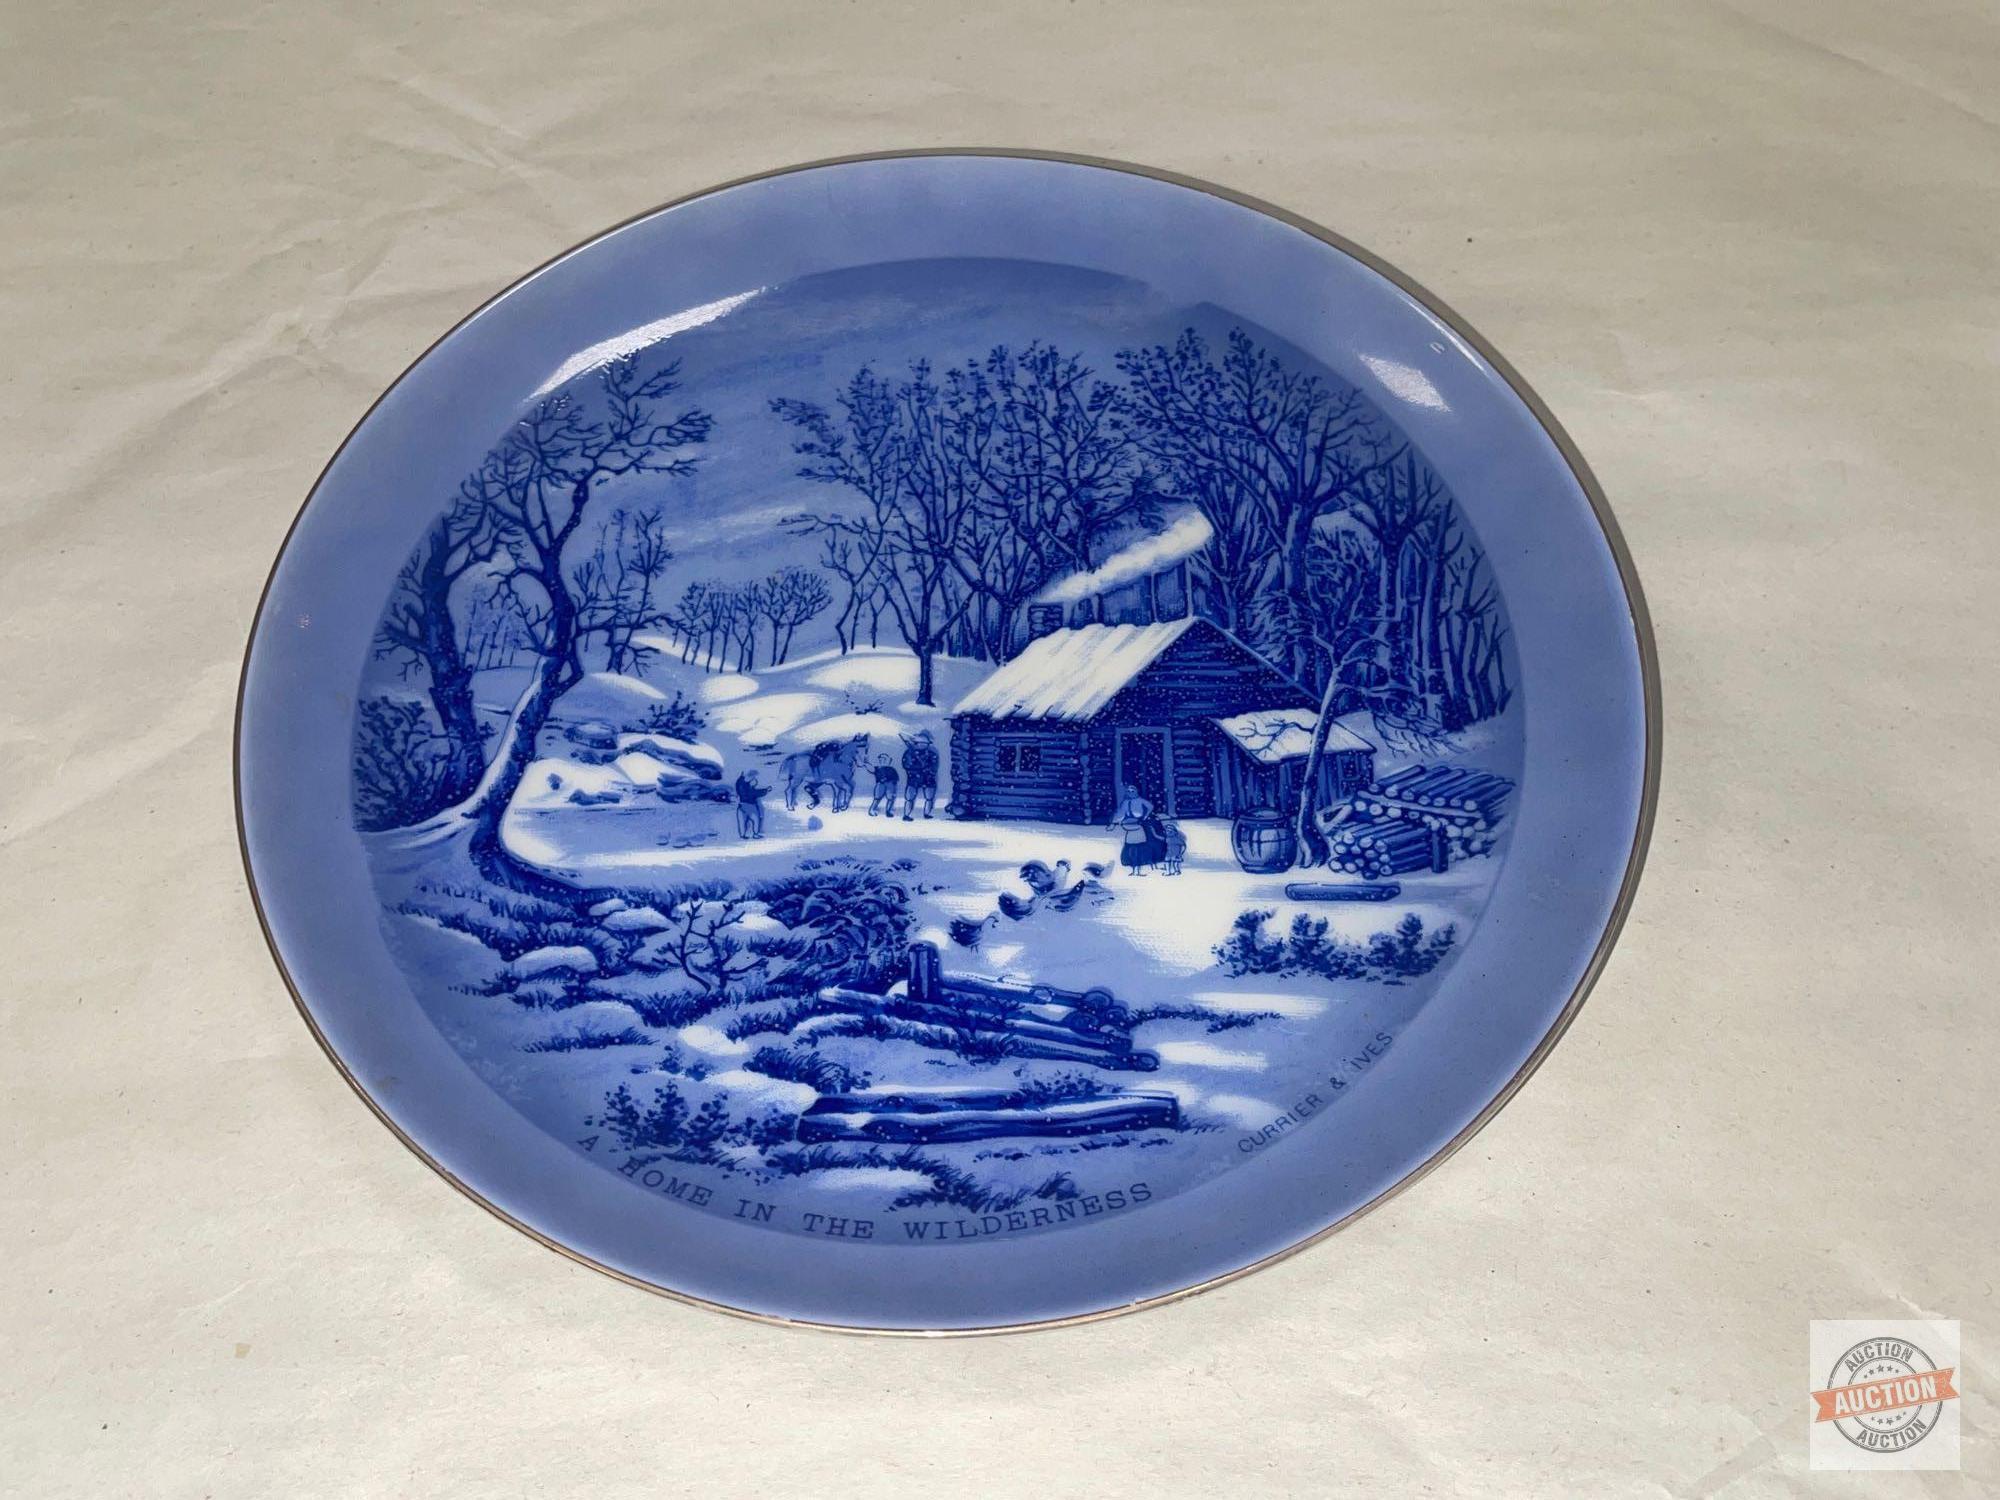 Dish ware - 3 vintage plates, Blue/white, 2 Genuine hand engraving, Countrypride Enoch Wedgwood 10"w